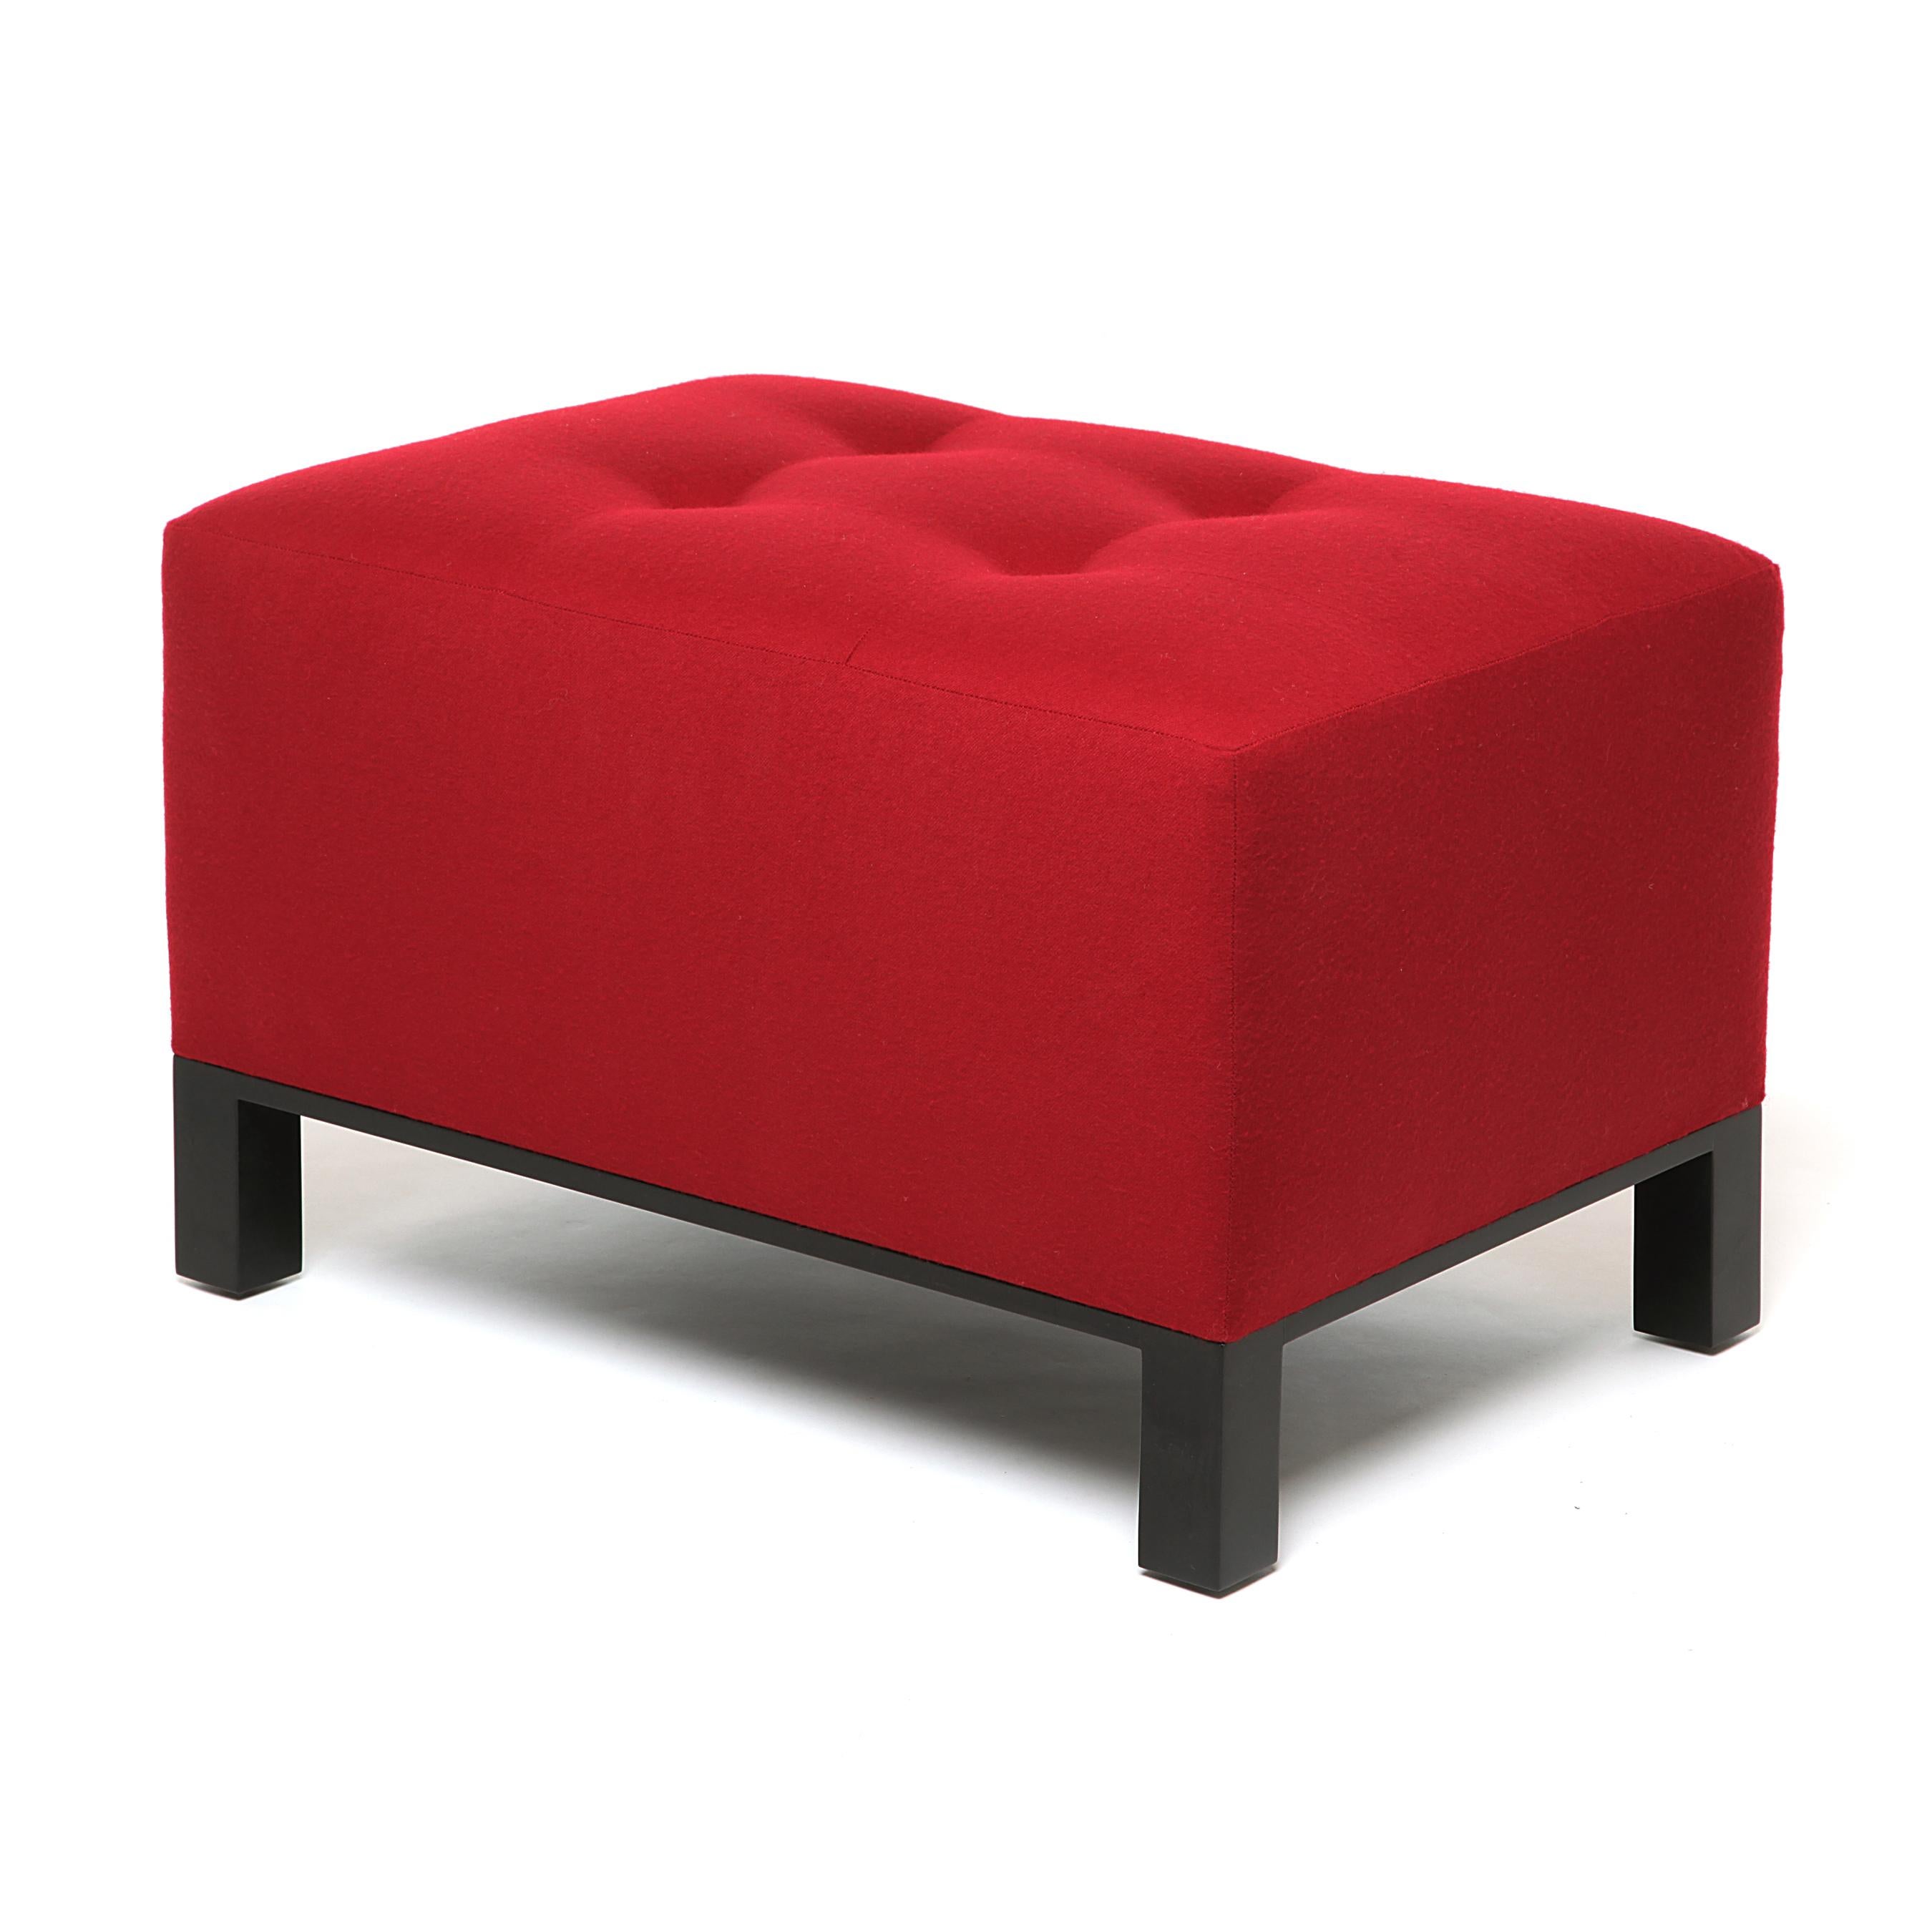 A poised piece, this simple yet energetic ottoman is another great balance of modern and traditional flair with a wide base to meet the proportions of the chair.